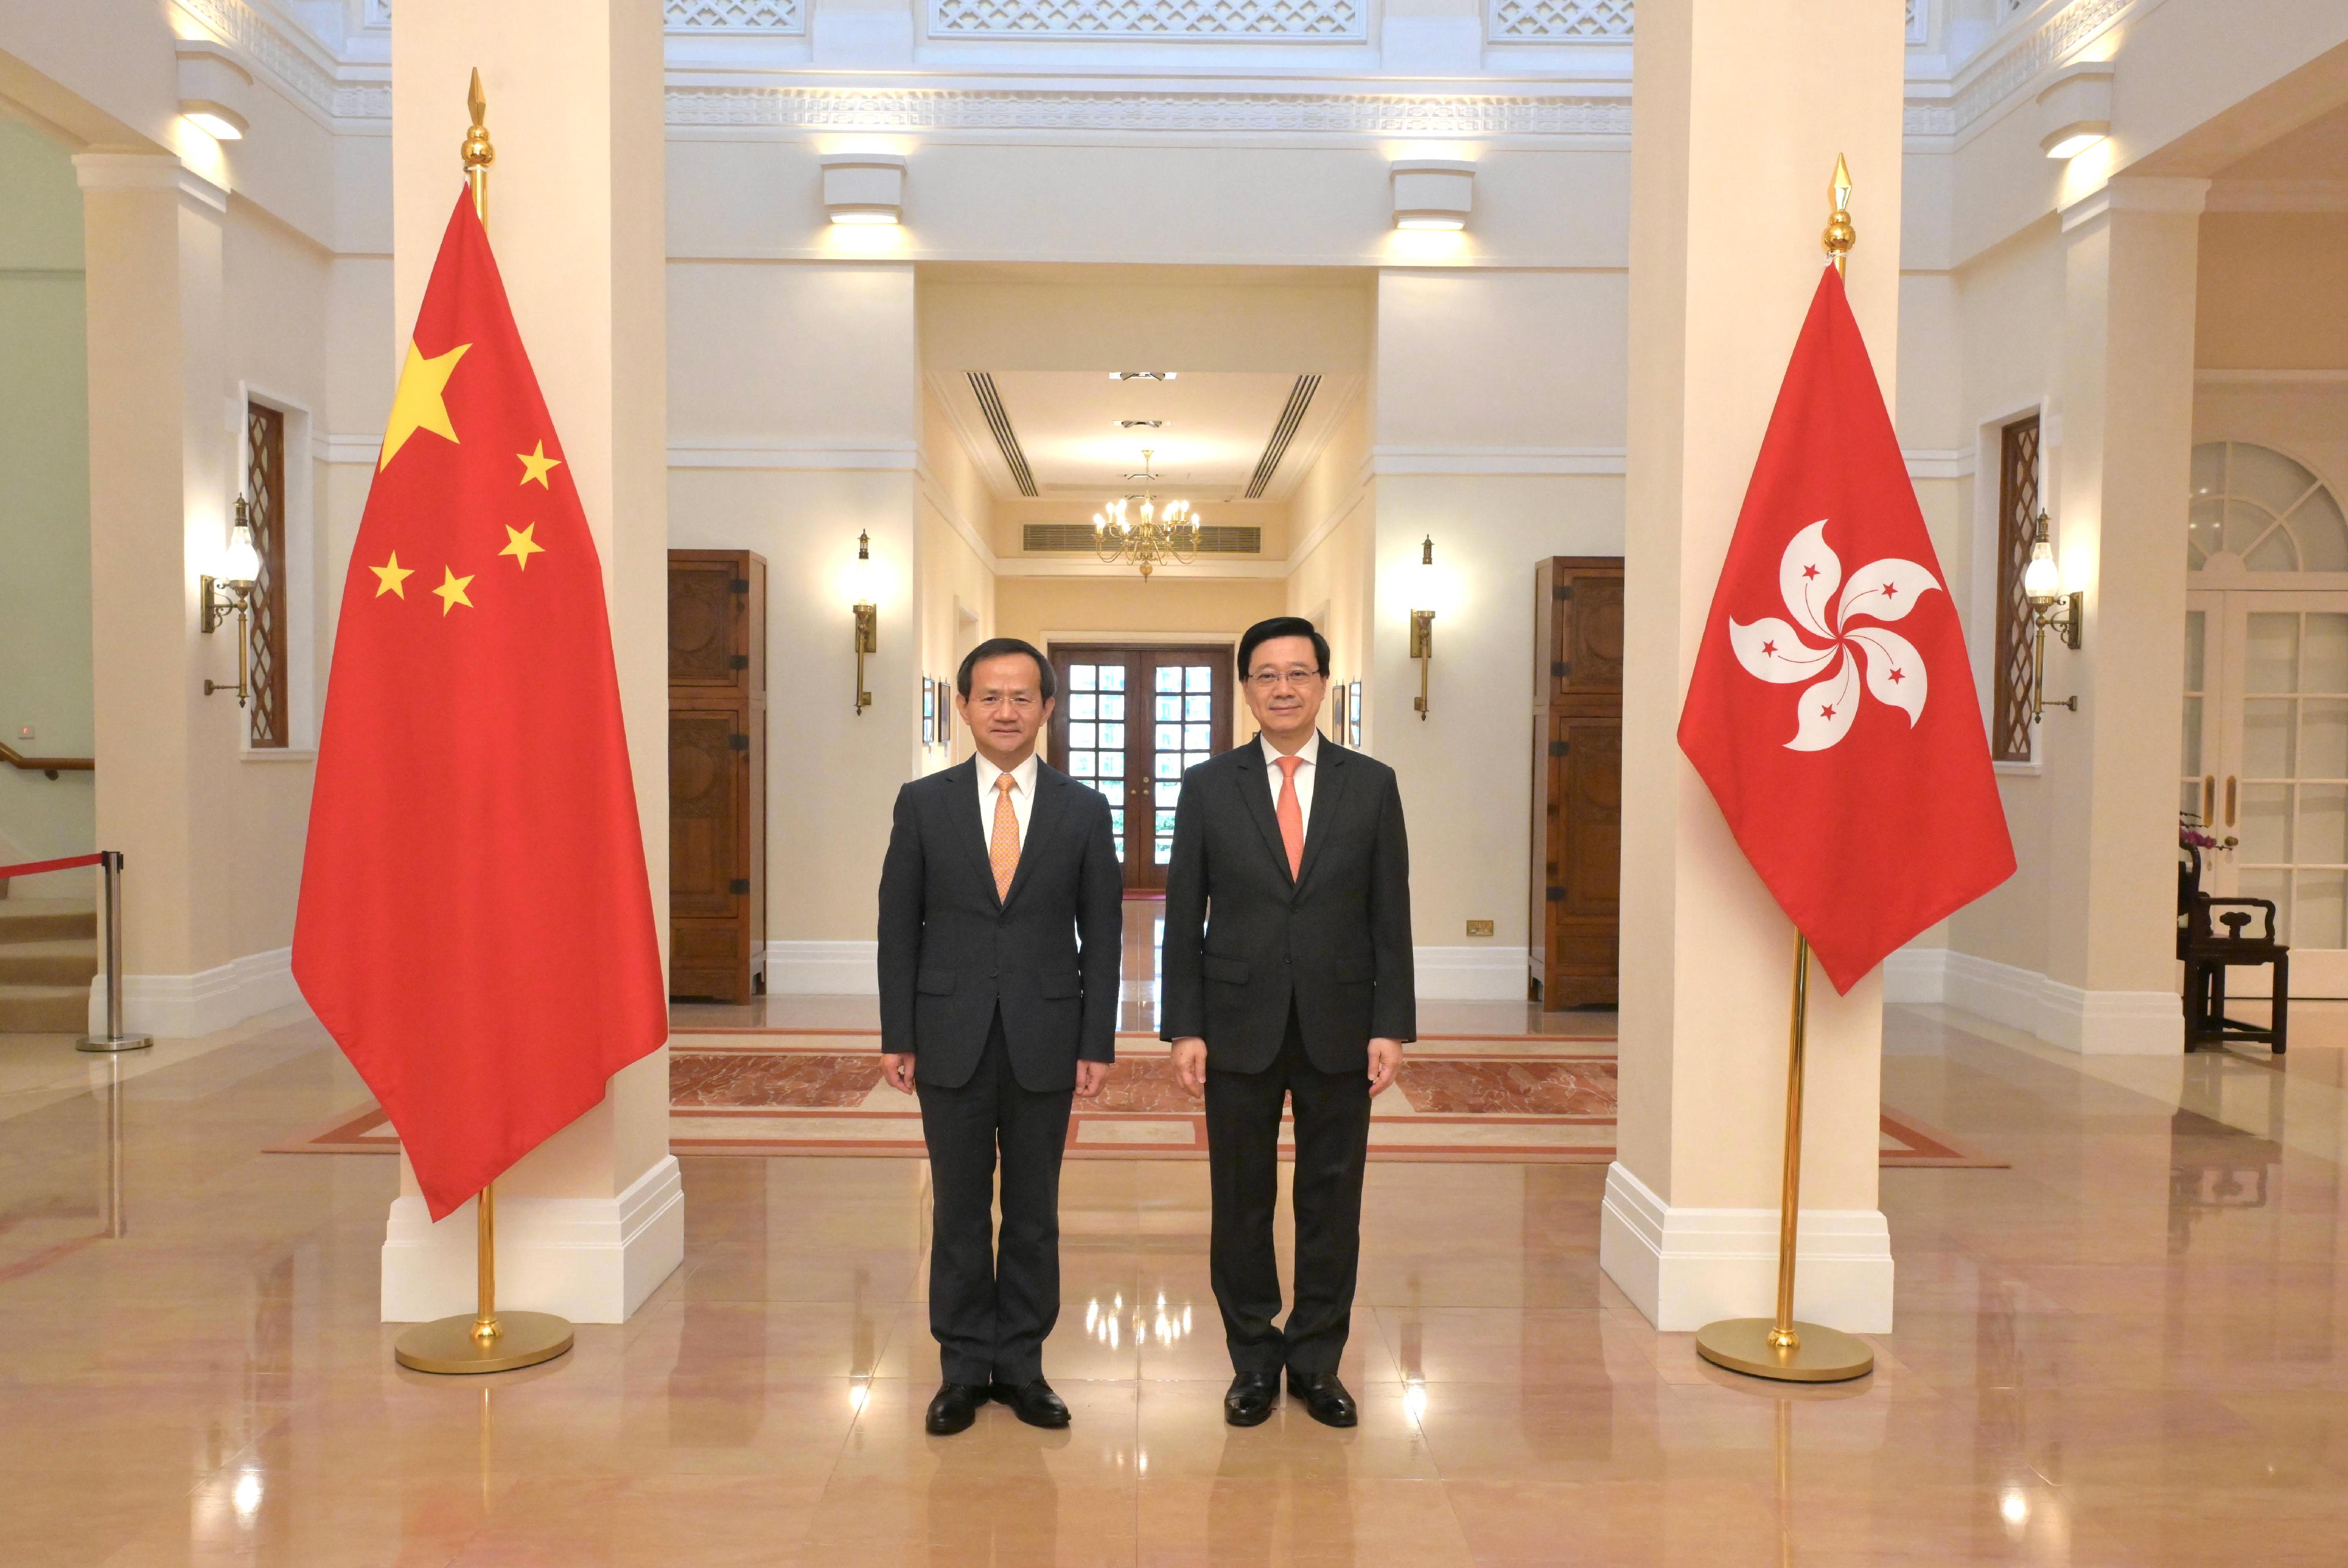 The Chief Executive, Mr John Lee (right), meets the Mayor of Beijing, Mr Yin Yong (left), at Government House today (November 29).